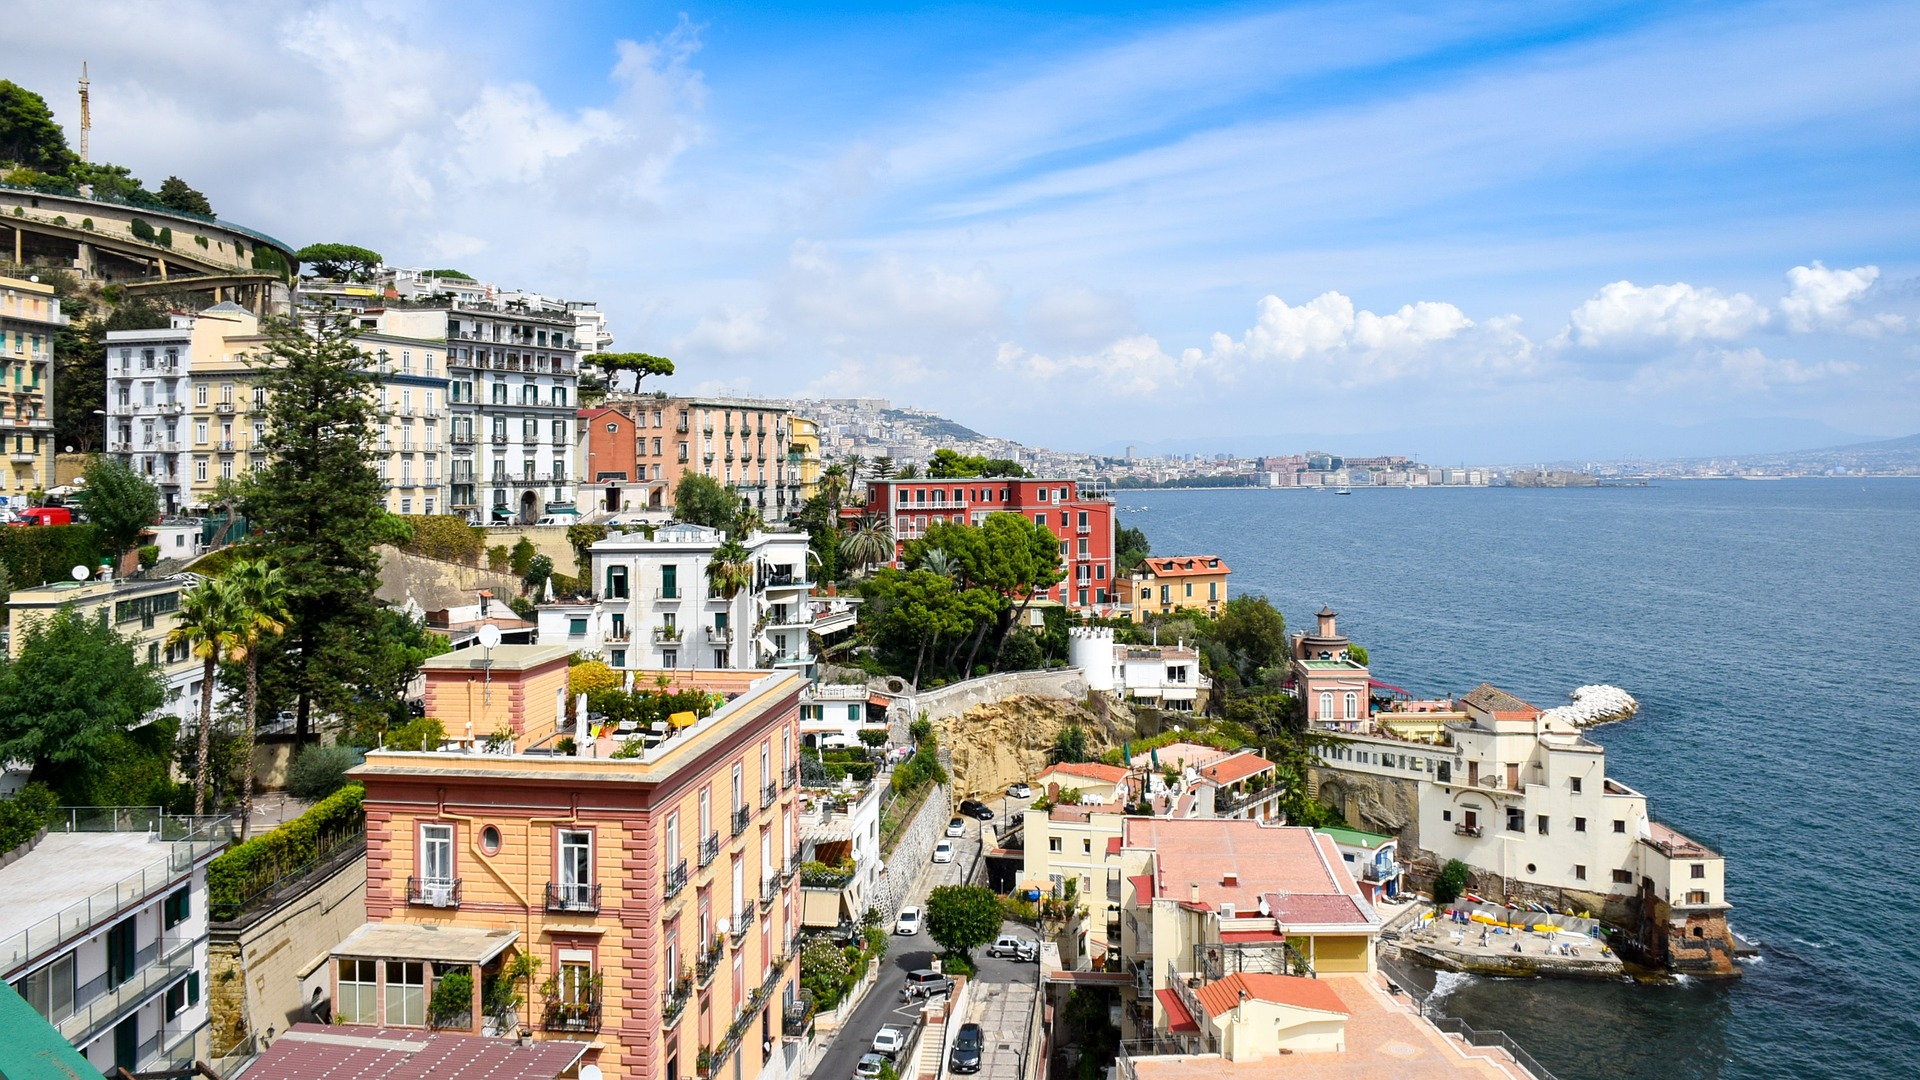 How To Obtain Property Prices In Naples Using This Real Estate API